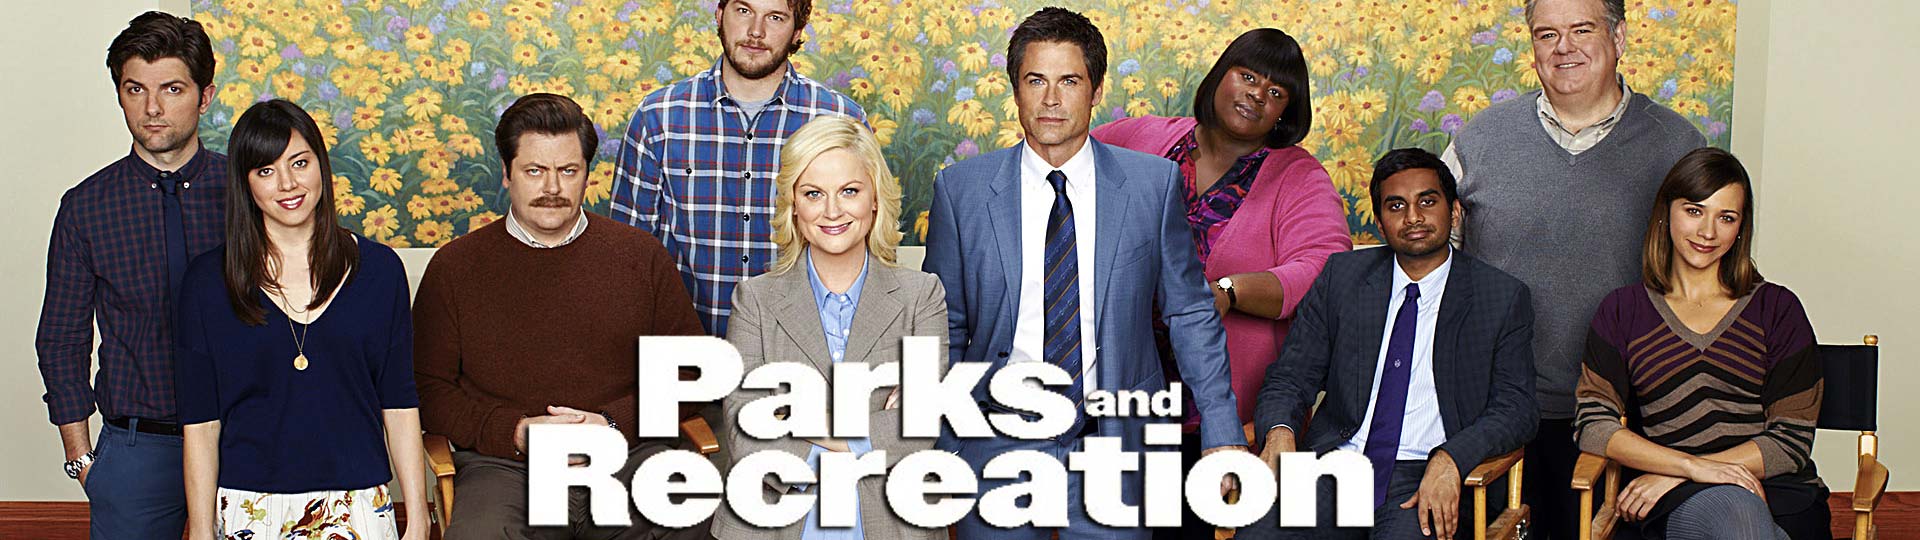 High Resolution Wallpaper | Parks And Recreation 1920x540 px